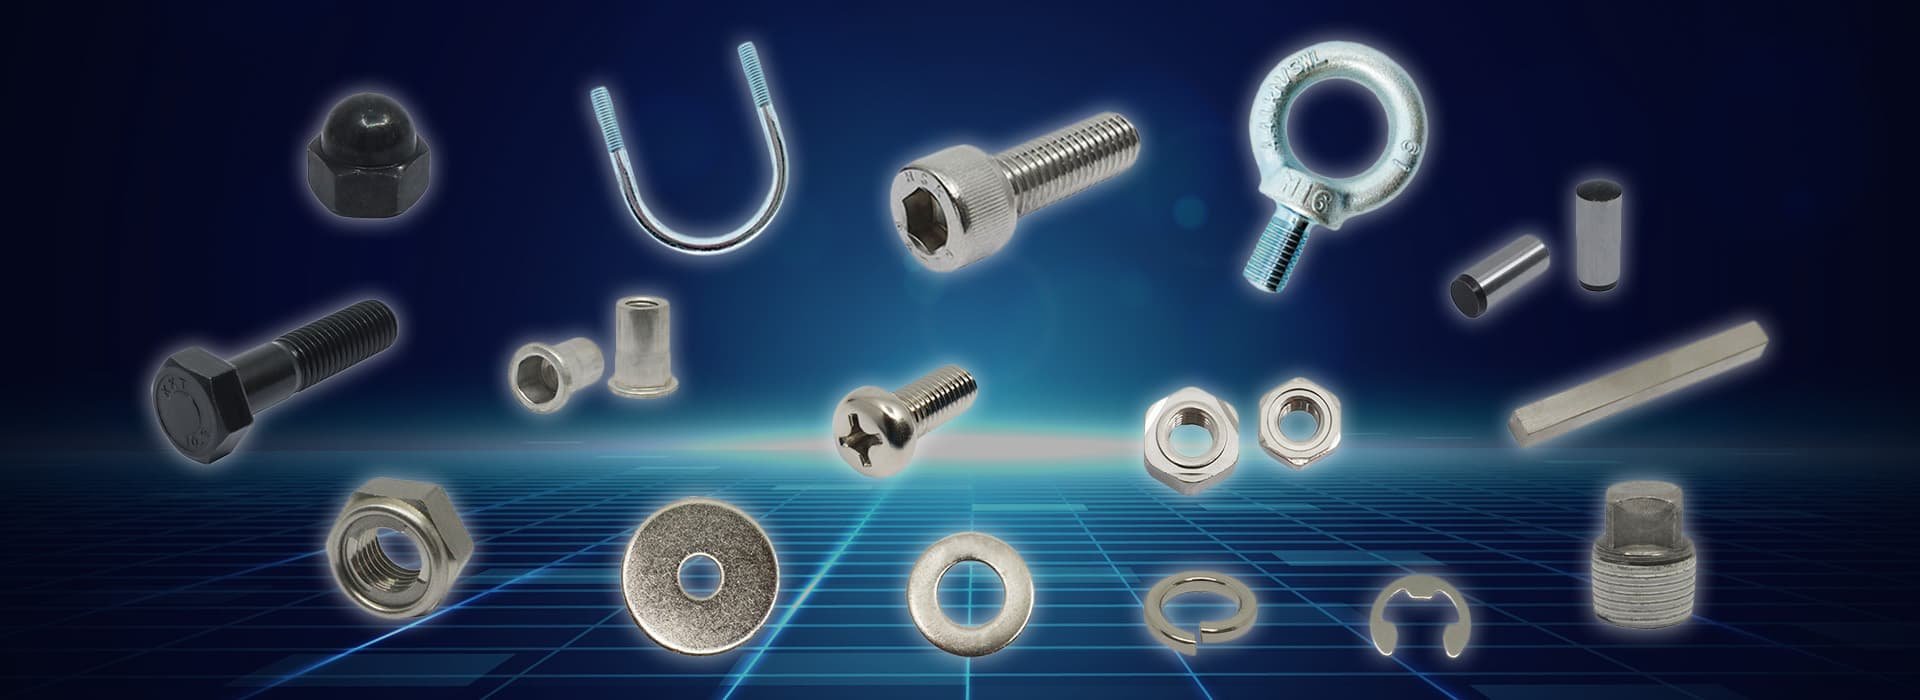 All fasteners